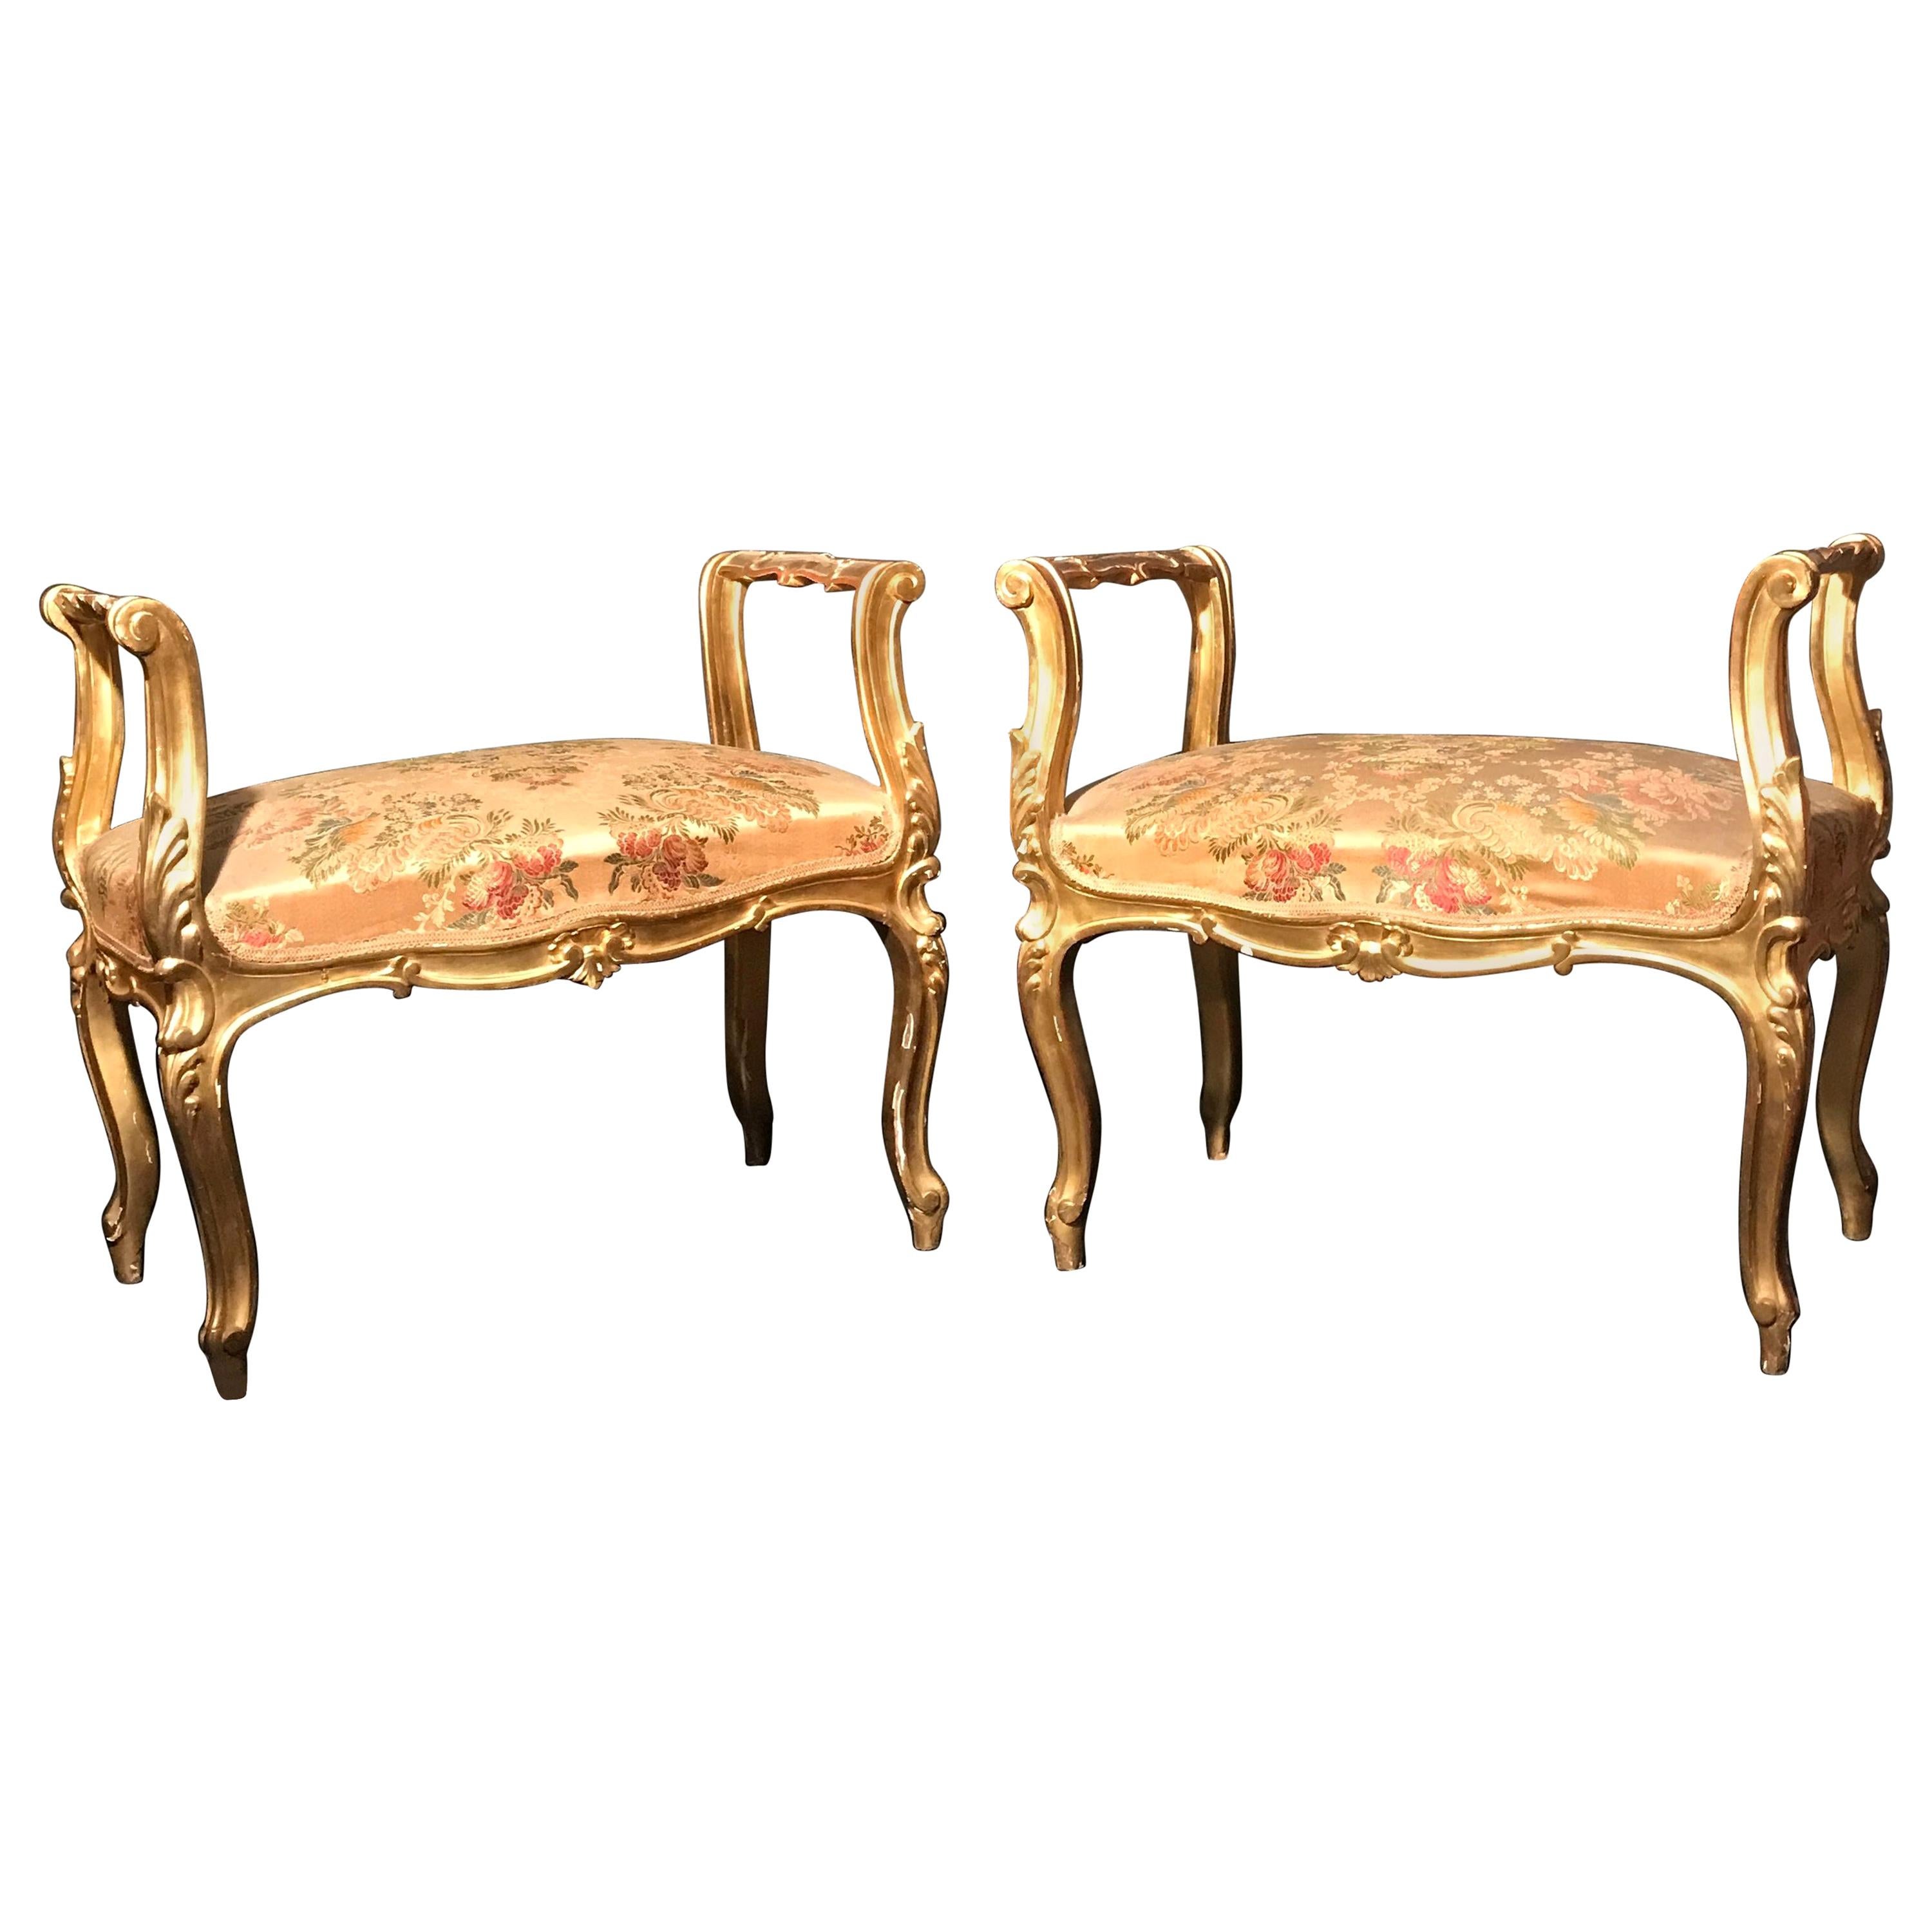 Pair of 19th Century Italian Window Benches or Settees